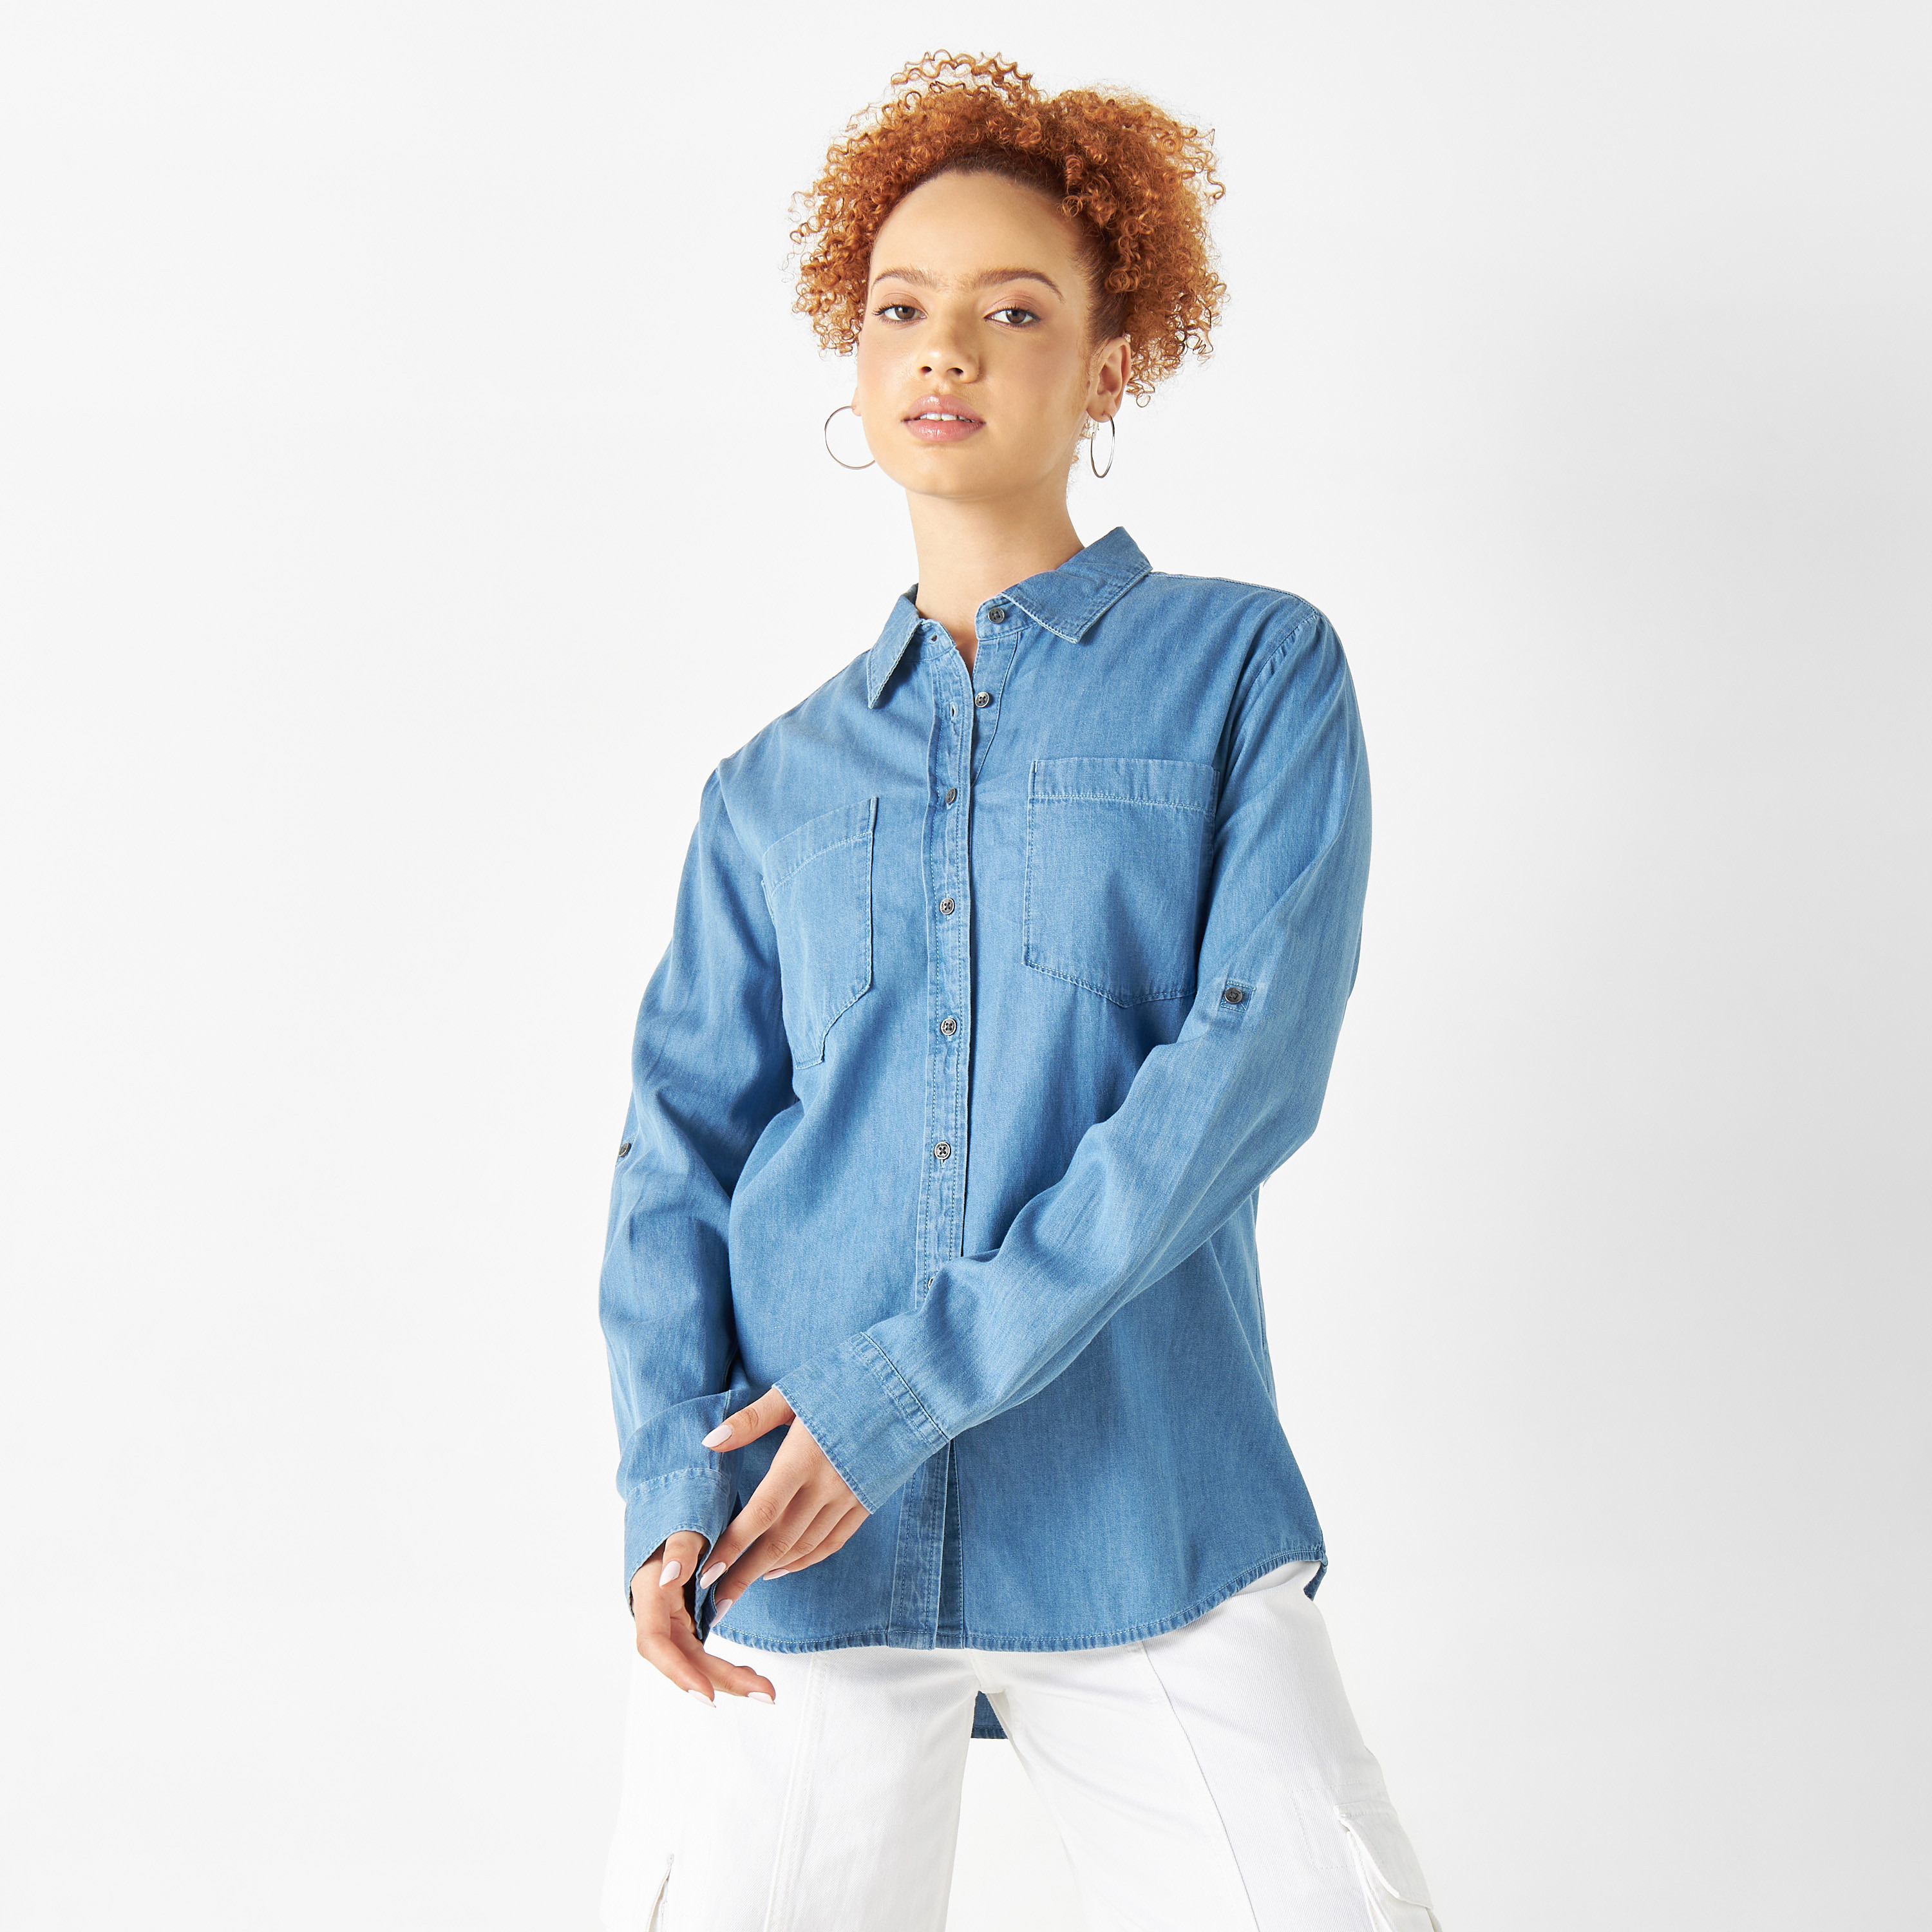 Discover more than 180 lee cooper denim shirts